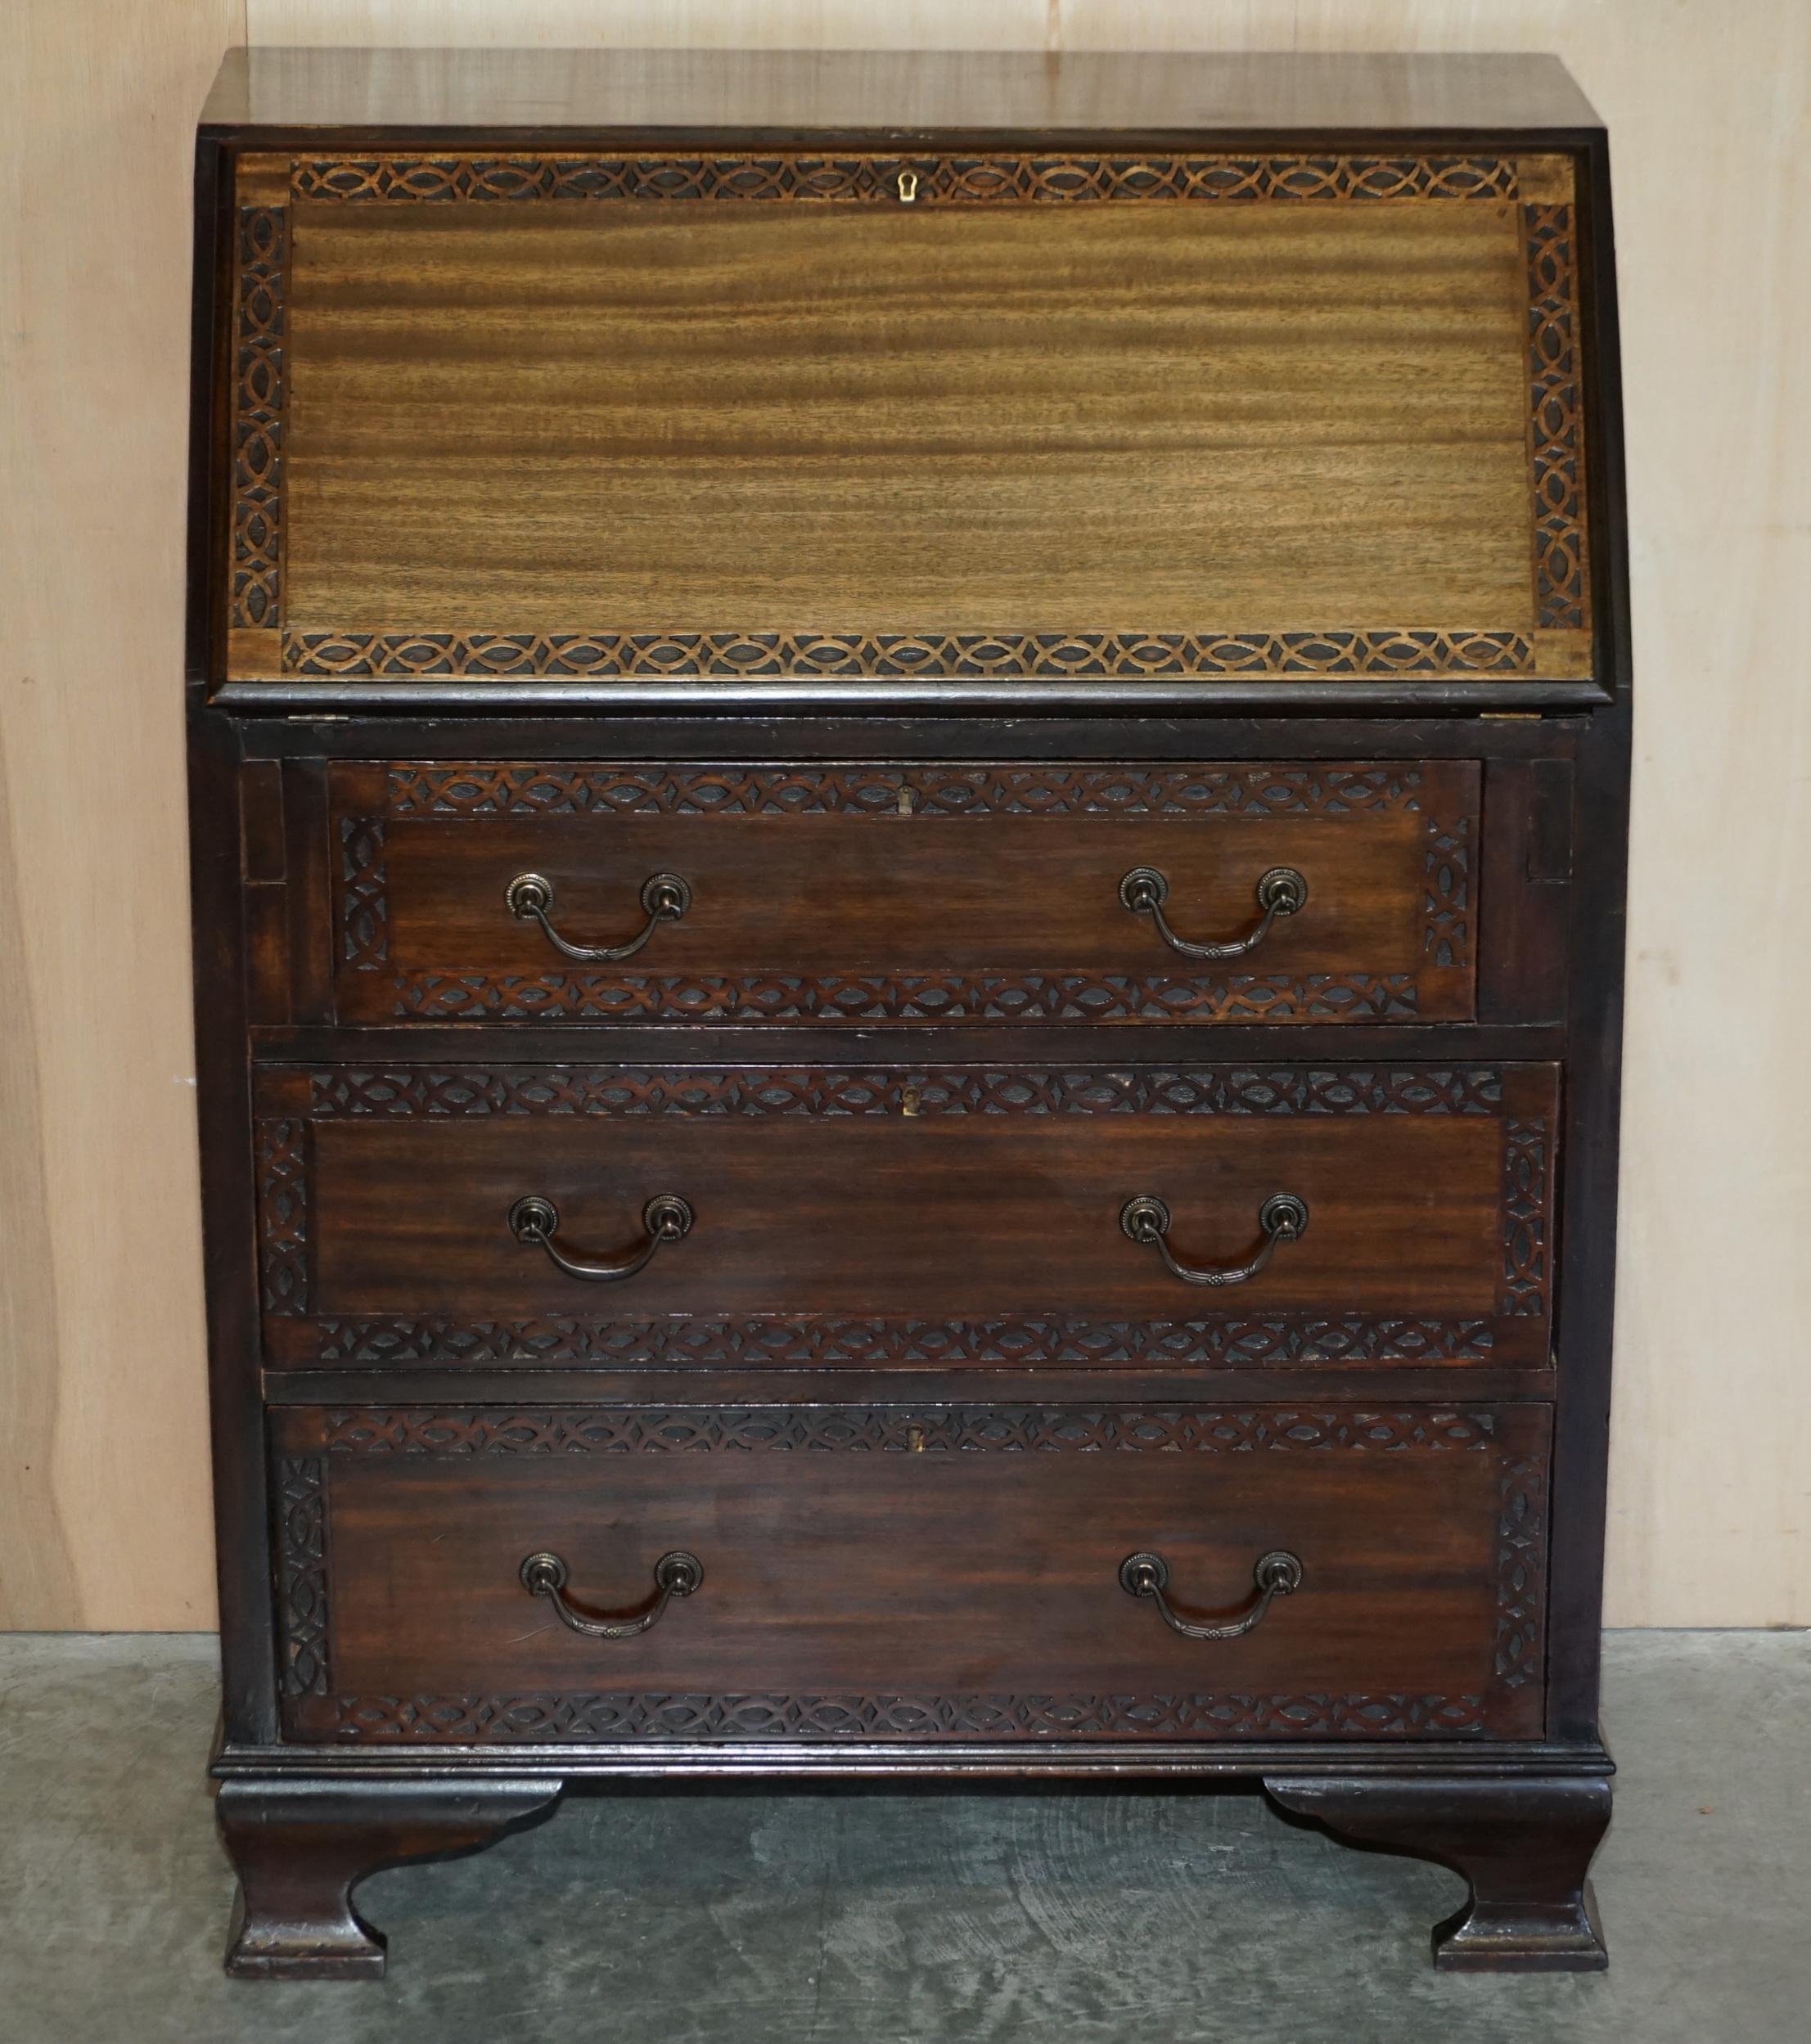 We are delighted to offer for sale this lovely circa 1900 mahogany drop front bureau in the Thomas Chippendale style made and stamped by Arnold Bros

A good looking and well-made piece, it has Chippendale style fret work carving, the handles are